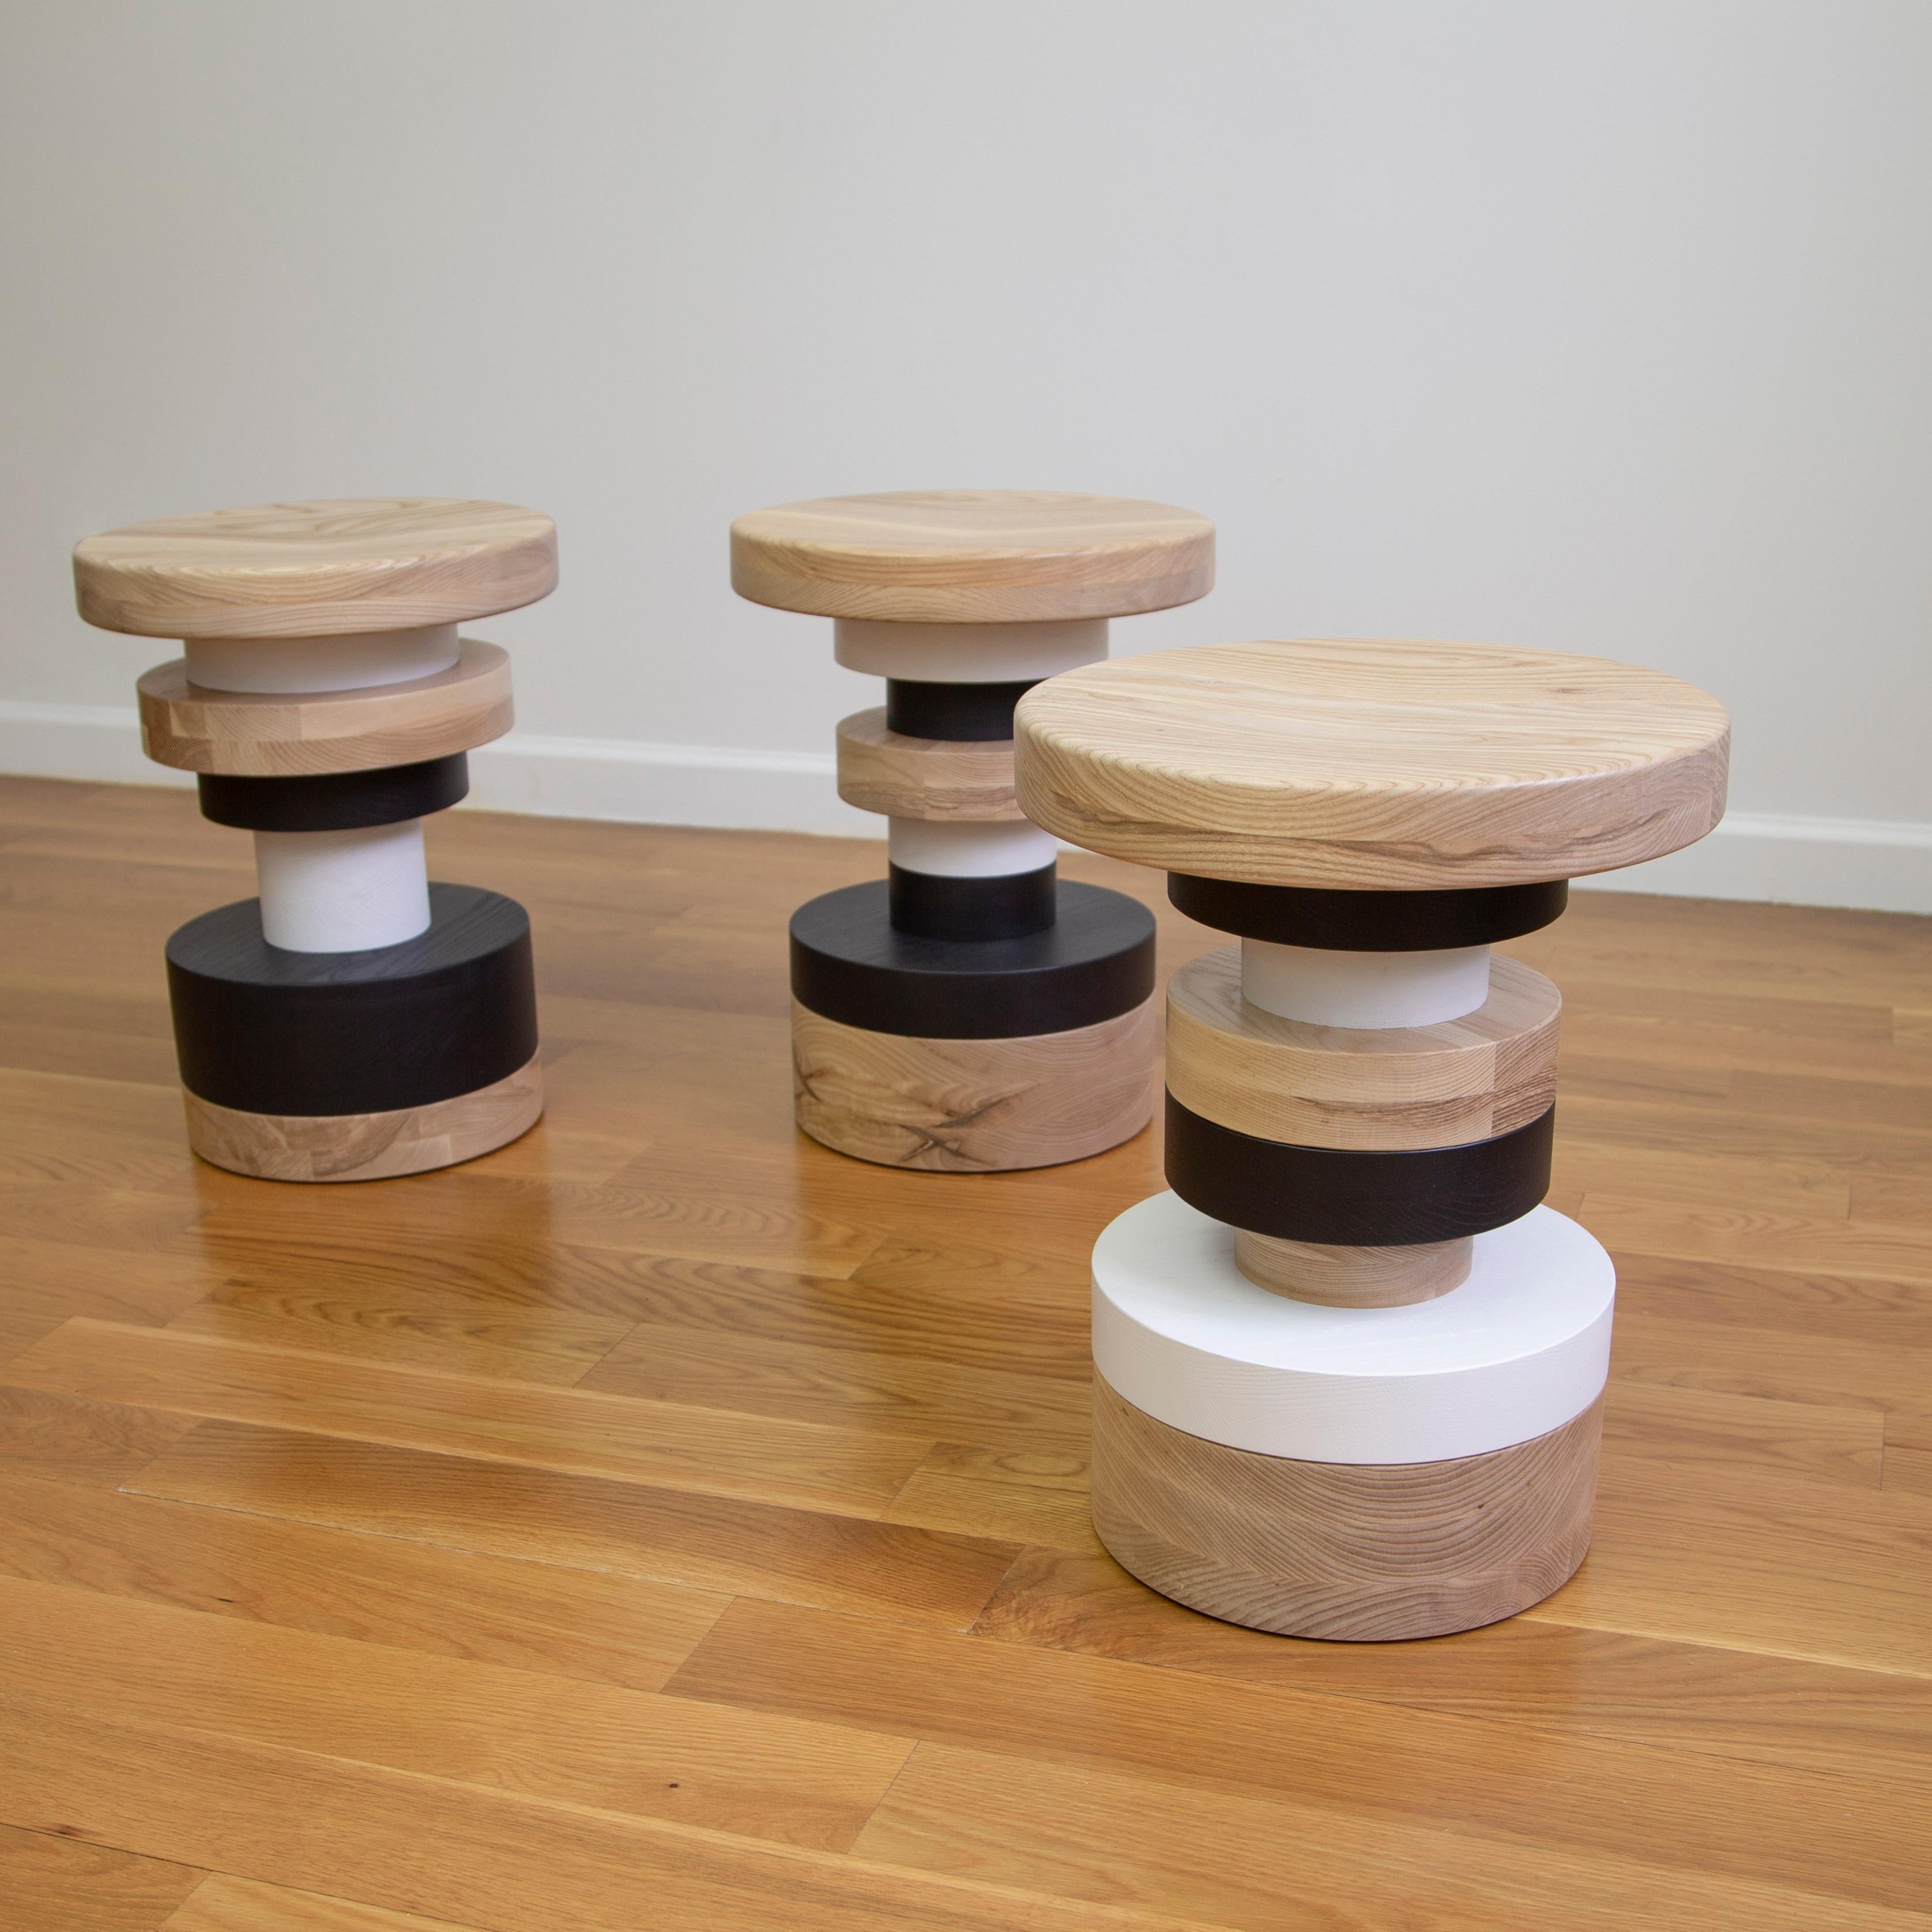 American Low Sass Stool from Souda, Chairs, Seating, Set of 3, Made to Order For Sale